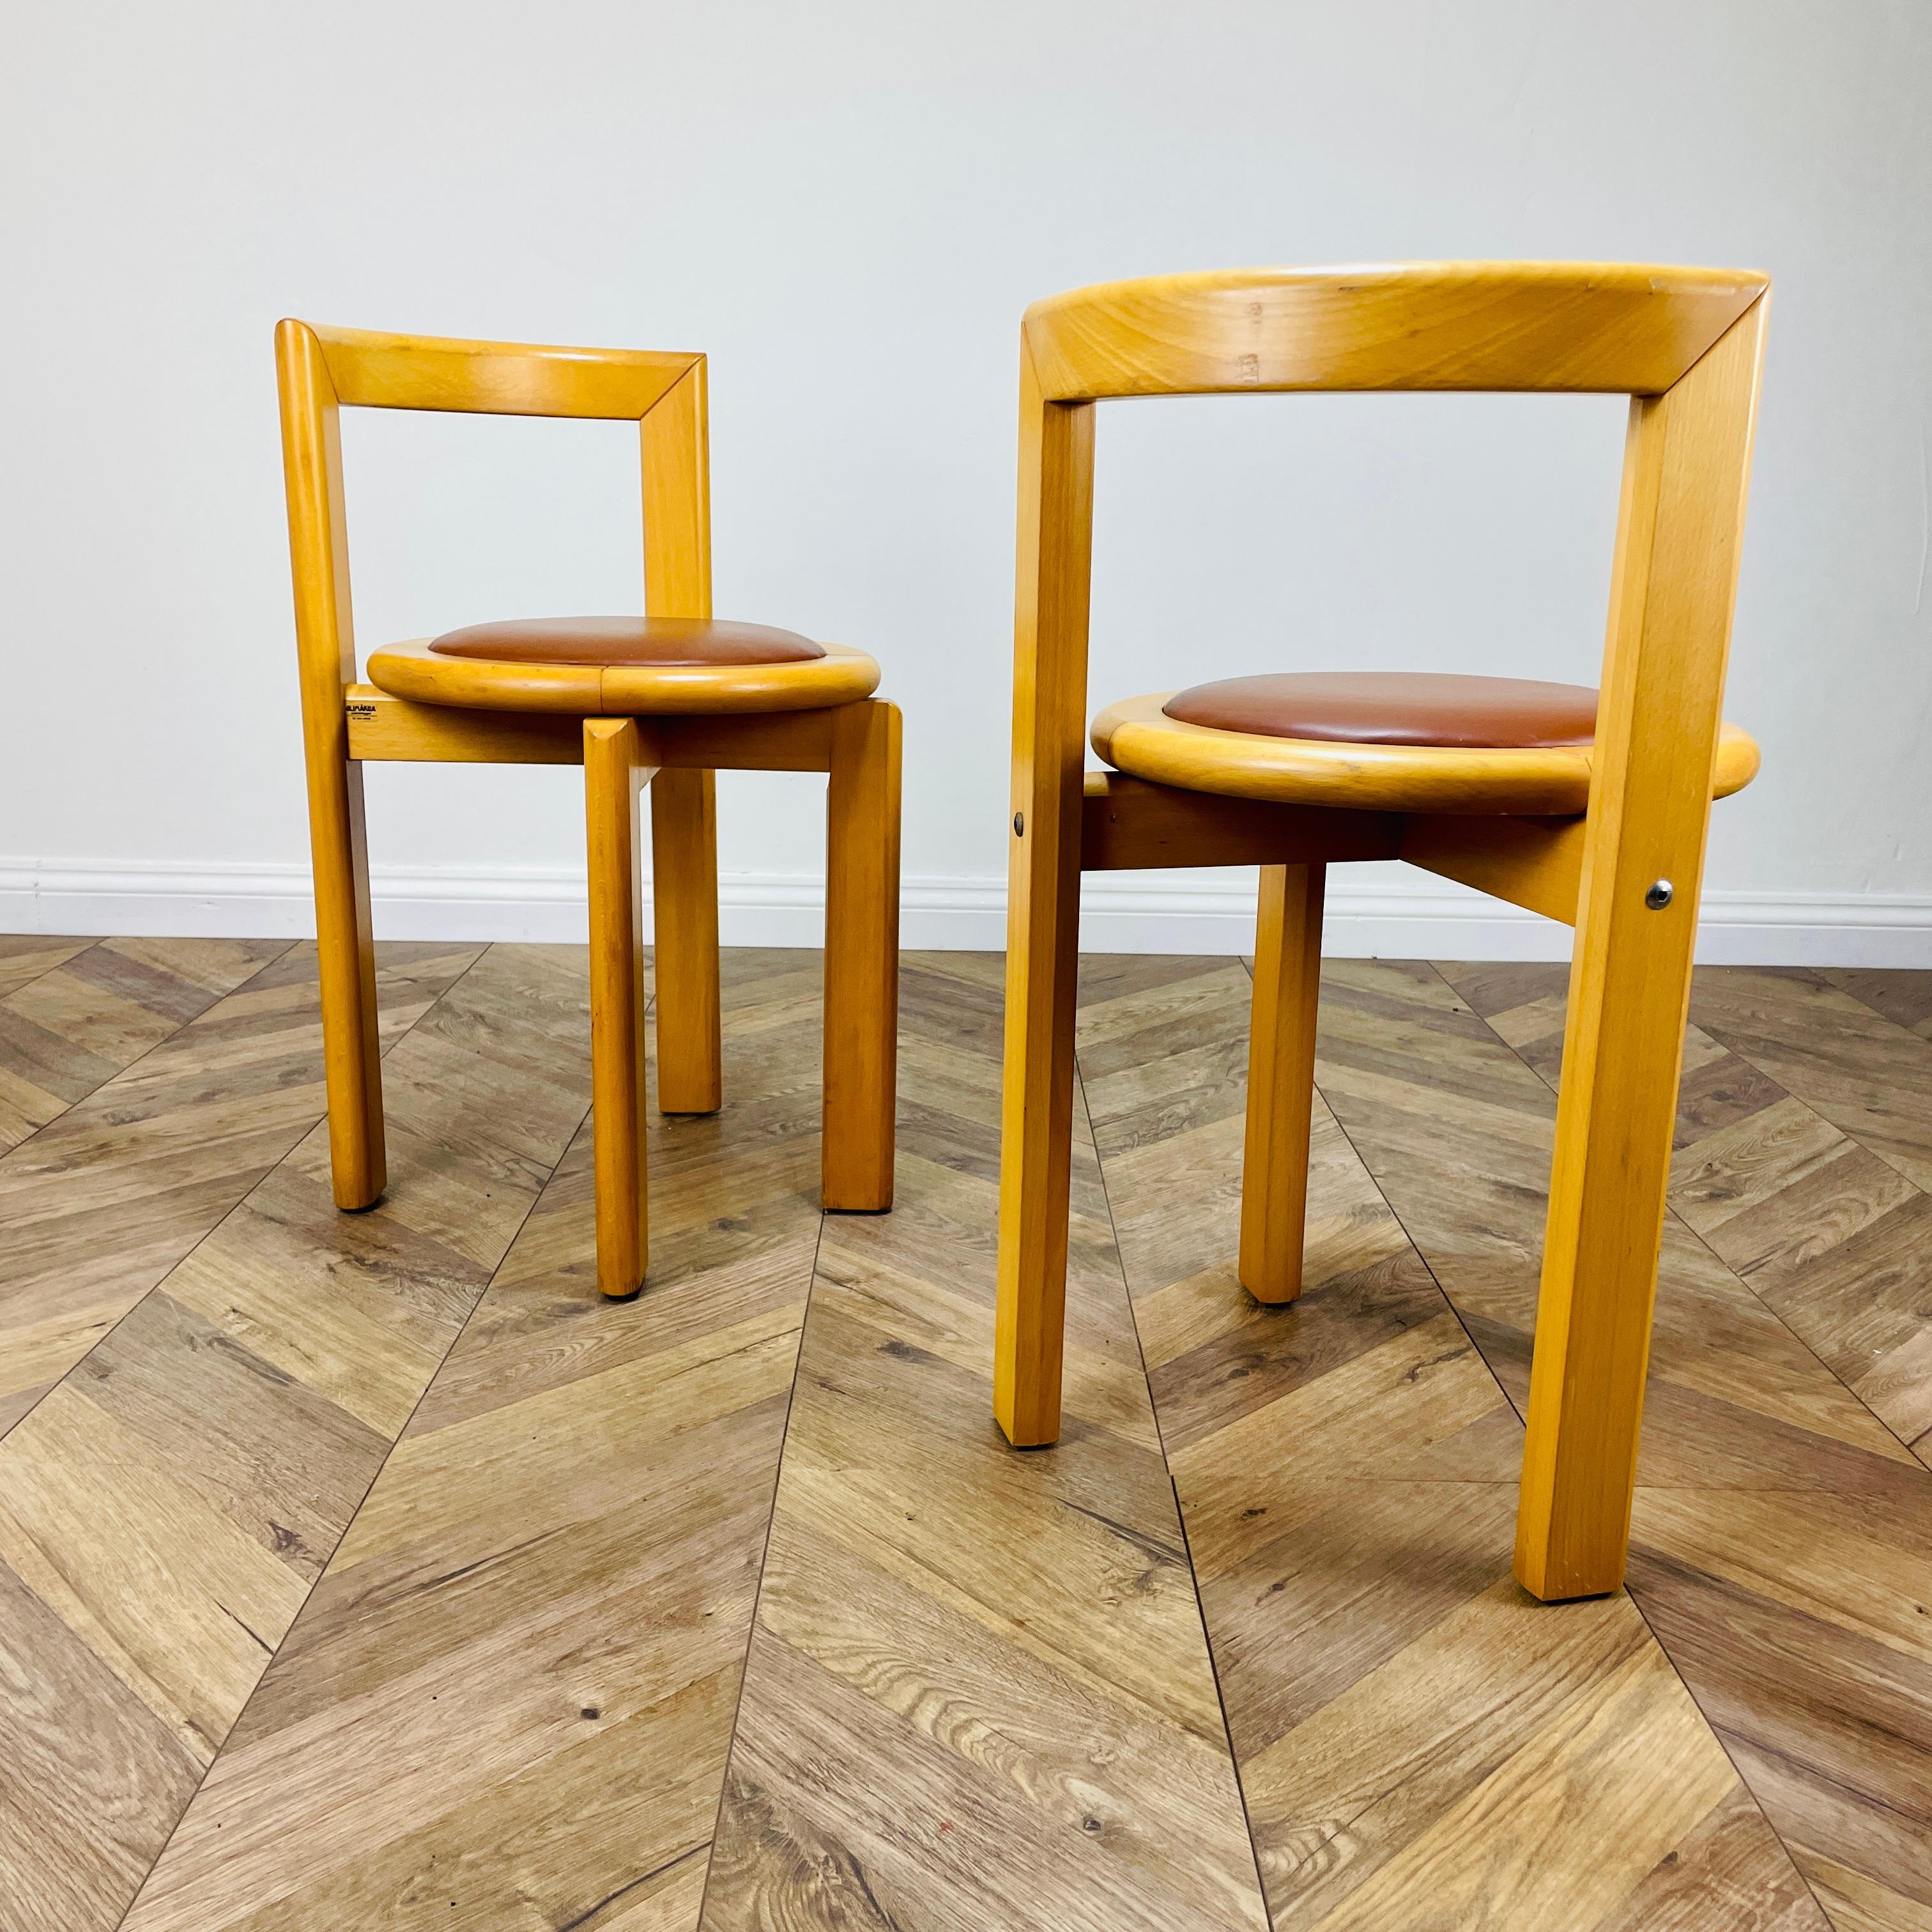 Modernist Chairs inspired by Bruno Rey, Made by Glimåkra of Sweden, Set of 2 1